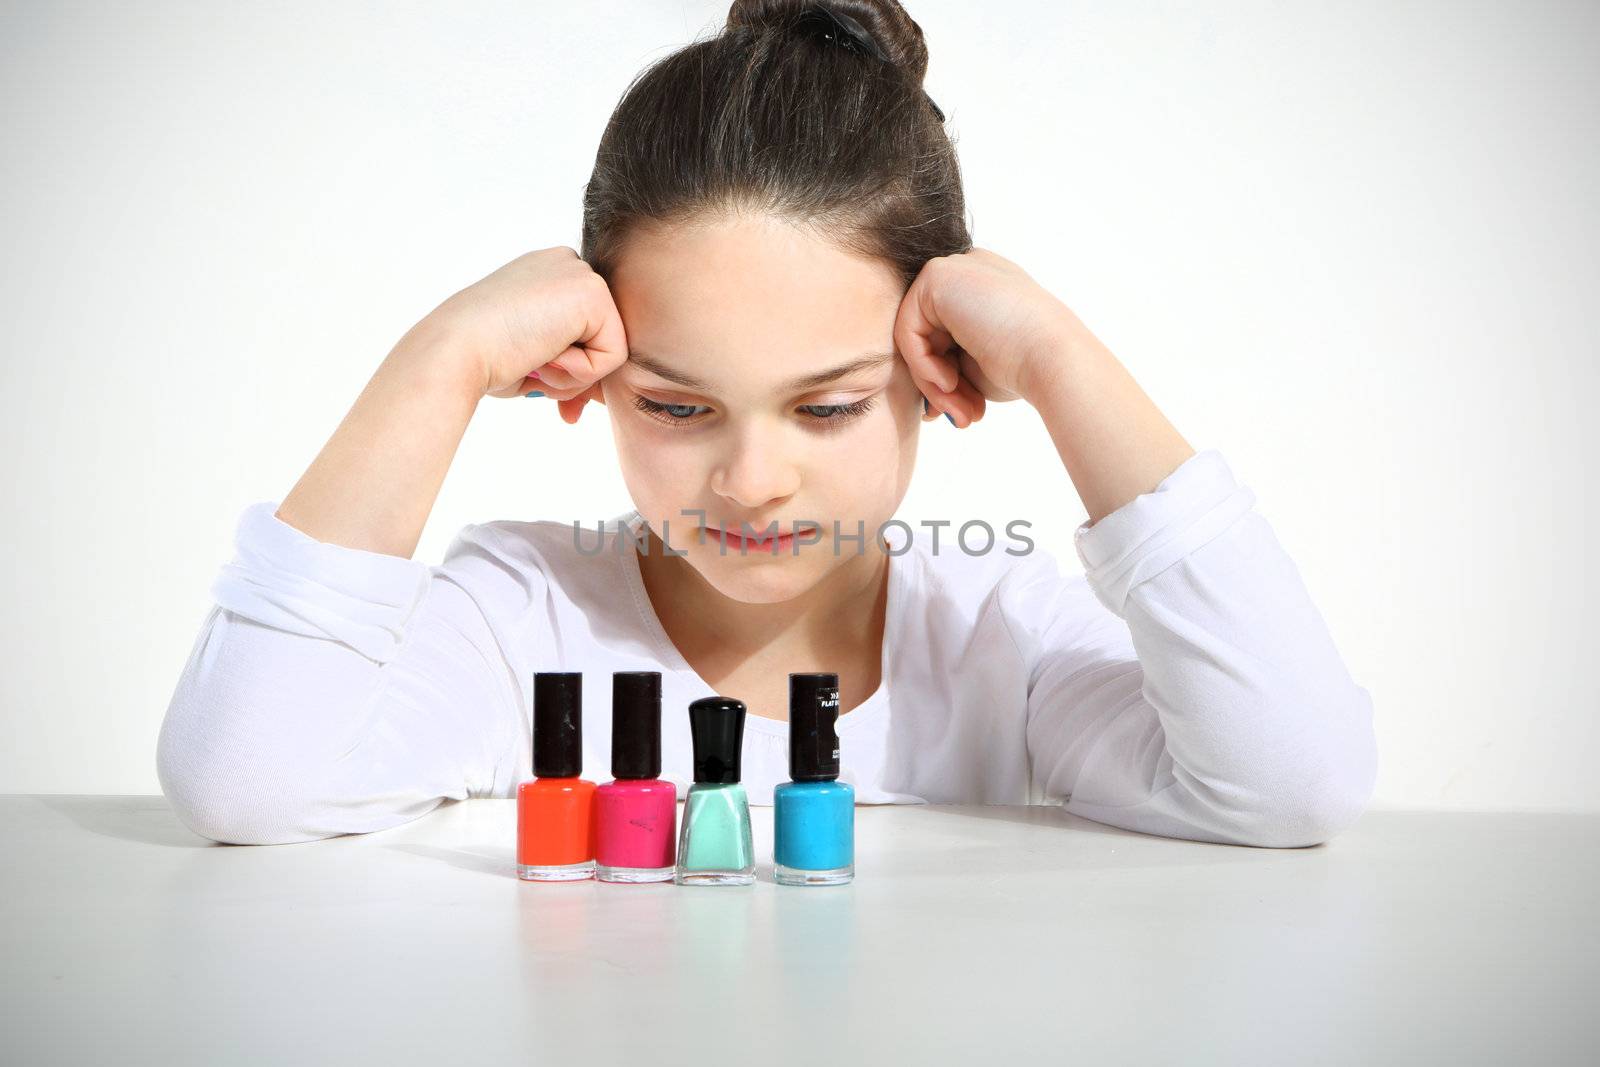 Little girl and nail polishes by robert_przybysz